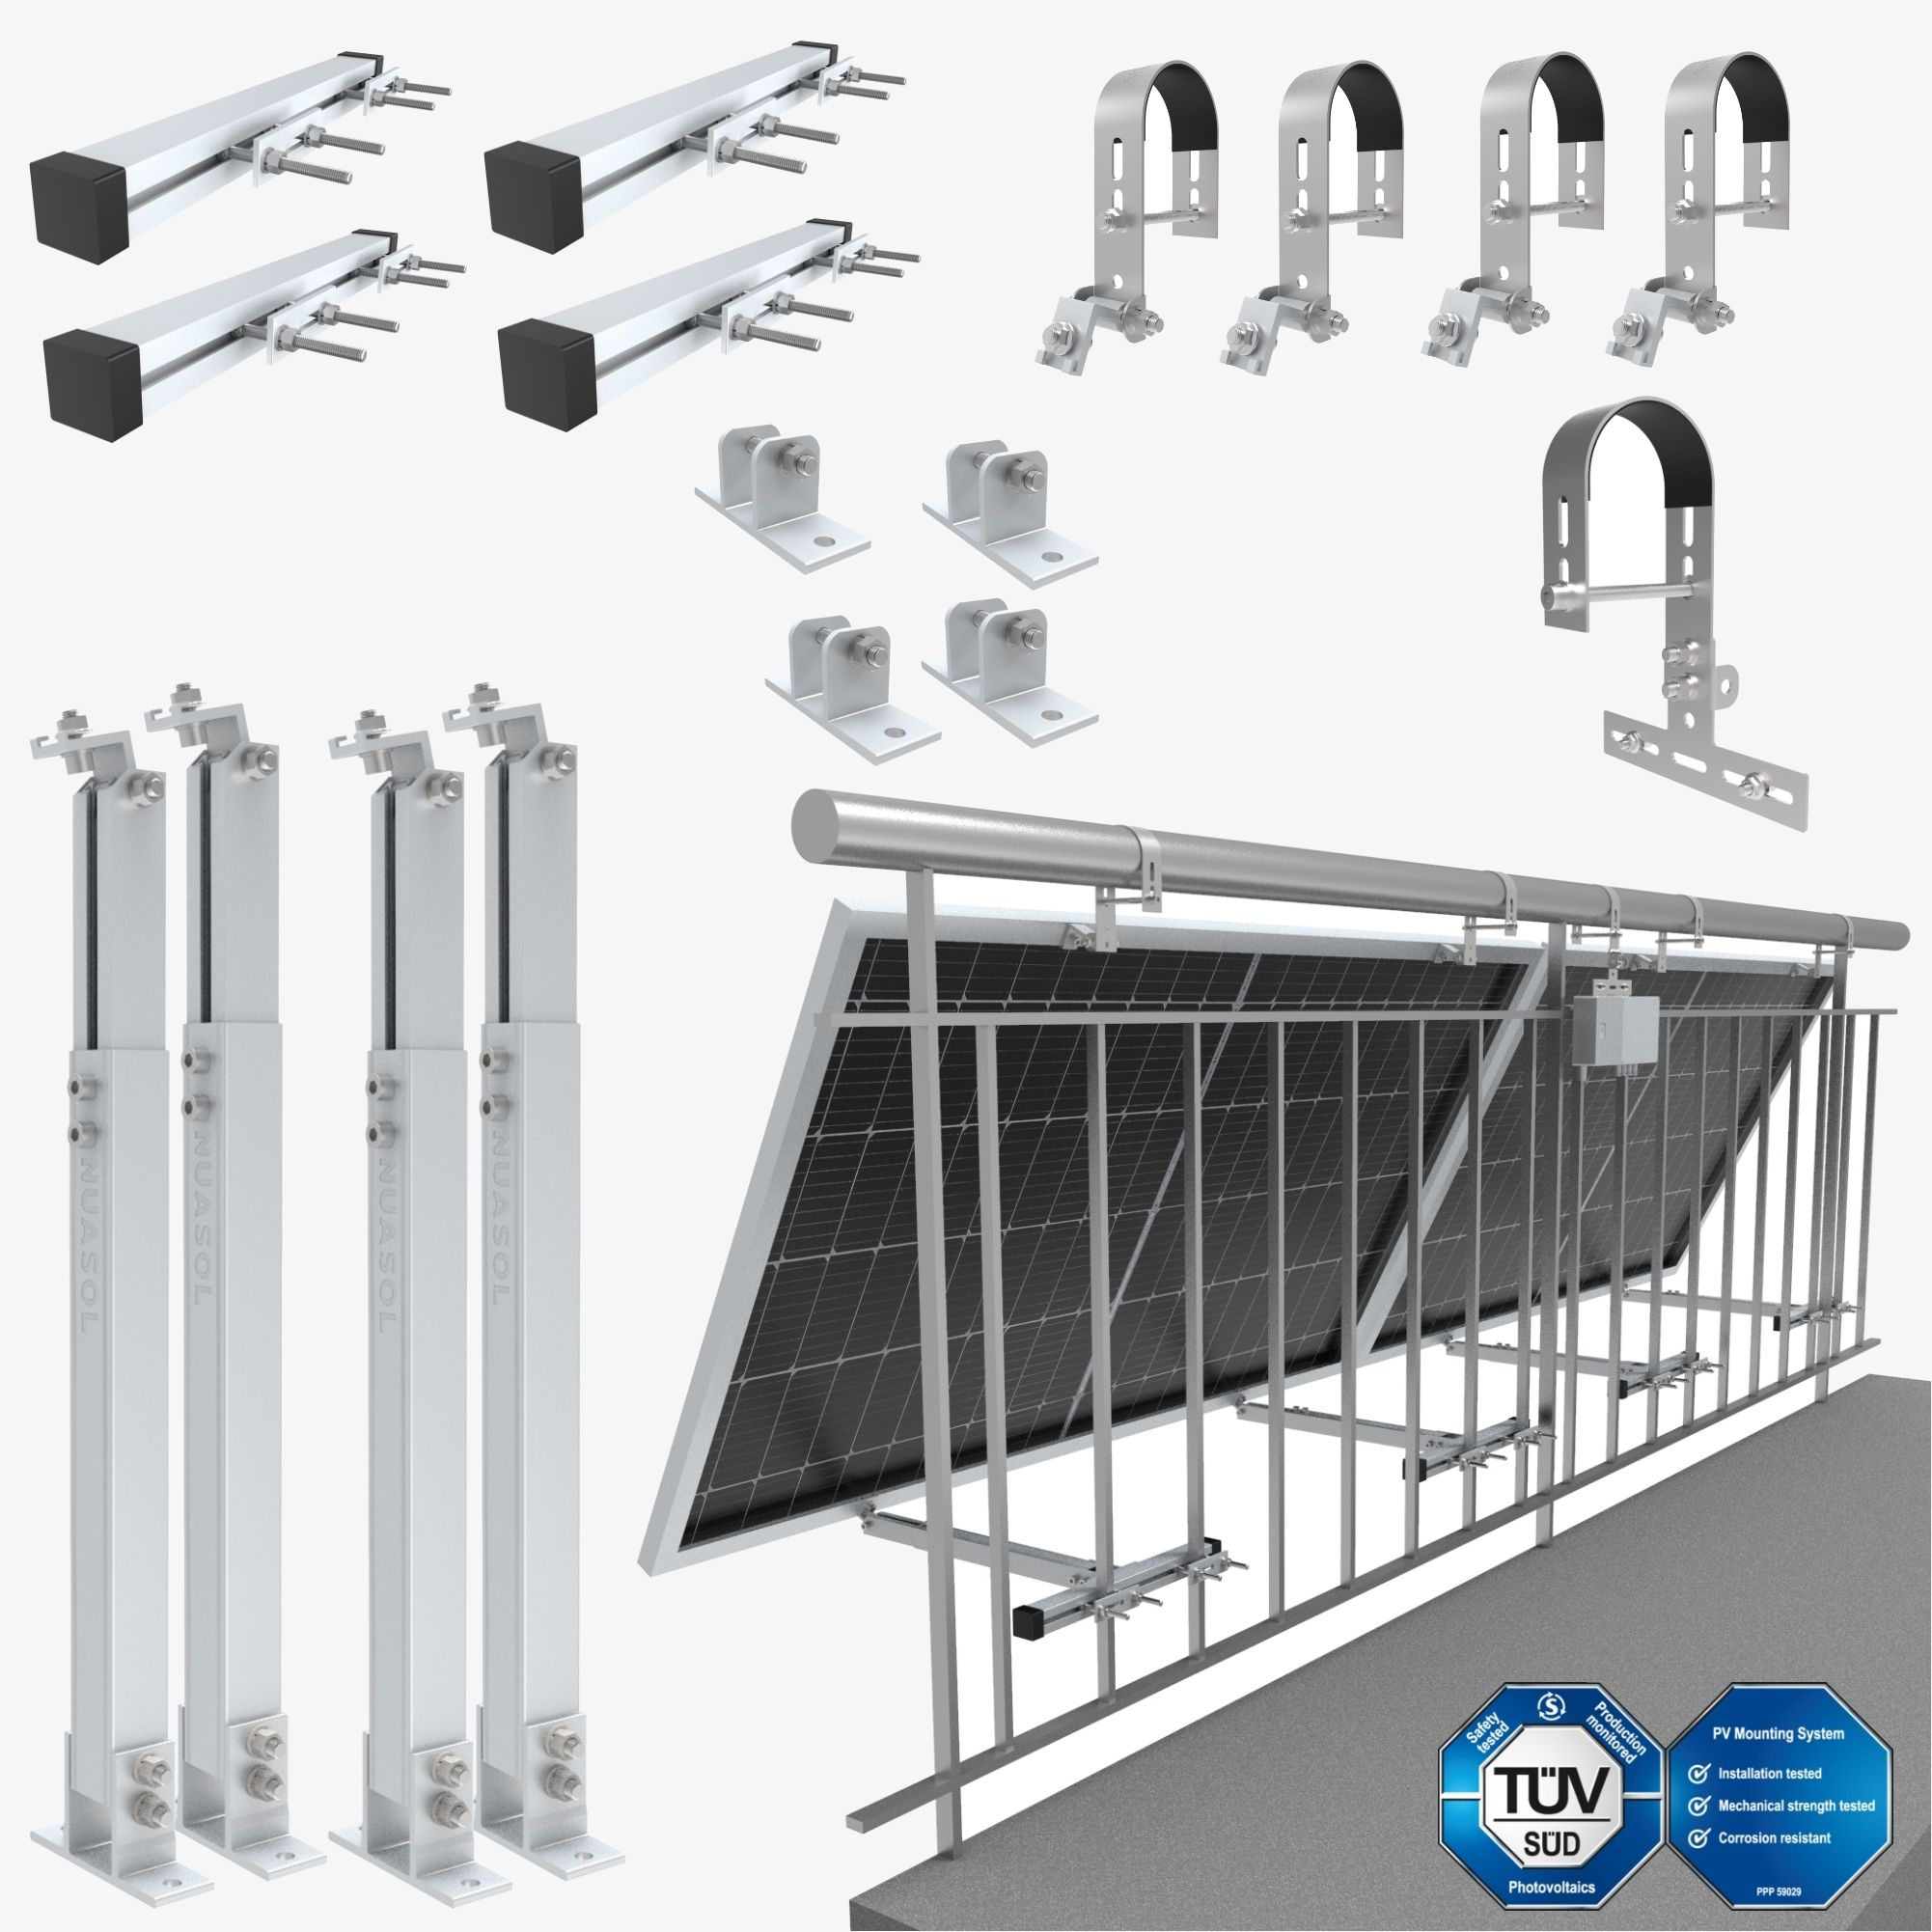 Solar Panel T bolts, SUS 304 for PV Module Mounting Rails